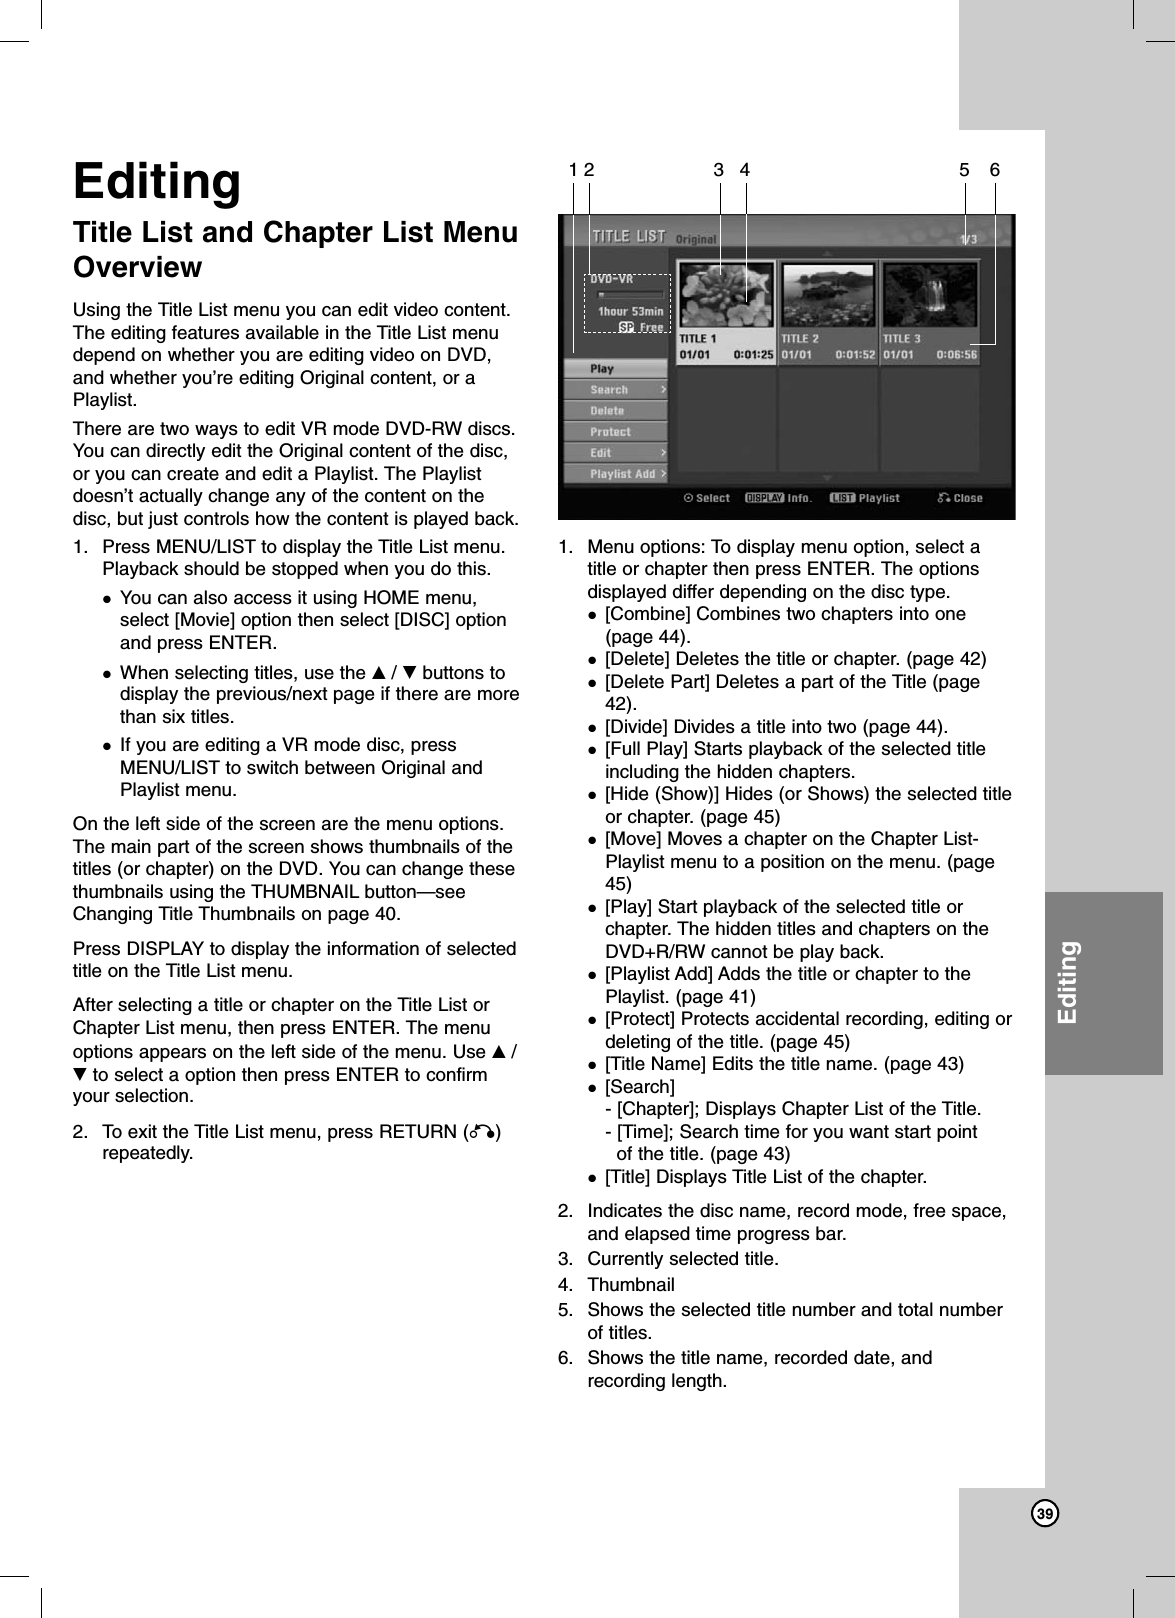 39EditingEditingTitle List and Chapter List MenuOverview Using the Title List menu you can edit video content.The editing features available in the Title List menudepend on whether you are editing video on DVD,and whether you’re editing Original content, or aPlaylist.There are two ways to edit VR mode DVD-RW discs.You can directly edit the Original content of the disc,or you can create and edit a Playlist. The Playlistdoesn’t actually change any of the content on thedisc, but just controls how the content is played back.1. Press MENU/LIST to display the Title List menu.Playback should be stopped when you do this.You can also access it using HOME menu,select [Movie] option then select [DISC] optionand press ENTER.When selecting titles, use the v/ Vbuttons todisplay the previous/next page if there are morethan six titles.If you are editing a VR mode disc, pressMENU/LIST to switch between Original andPlaylist menu.On the left side of the screen are the menu options.The main part of the screen shows thumbnails of thetitles (or chapter) on the DVD. You can change thesethumbnails using the THUMBNAIL button—seeChanging Title Thumbnails on page 40.Press DISPLAY to display the information of selectedtitle on the Title List menu.After selecting a title or chapter on the Title List orChapter List menu, then press ENTER. The menuoptions appears on the left side of the menu. Use v/Vto select a option then press ENTER to confirmyour selection. 2. To exit the Title List menu, press RETURN (O)repeatedly.1. Menu options: To display menu option, select atitle or chapter then press ENTER. The optionsdisplayed differ depending on the disc type.[Combine] Combines two chapters into one(page 44).[Delete] Deletes the title or chapter. (page 42)[Delete Part] Deletes a part of the Title (page42).[Divide] Divides a title into two (page 44).[Full Play] Starts playback of the selected titleincluding the hidden chapters.[Hide (Show)] Hides (or Shows) the selected titleor chapter. (page 45)[Move] Moves a chapter on the Chapter List-Playlist menu to a position on the menu. (page45)[Play] Start playback of the selected title orchapter. The hidden titles and chapters on theDVD+R/RW cannot be play back.[Playlist Add] Adds the title or chapter to thePlaylist. (page 41)[Protect] Protects accidental recording, editing ordeleting of the title. (page 45)[Title Name] Edits the title name. (page 43)[Search] - [Chapter]; Displays Chapter List of the Title.- [Time]; Search time for you want start pointof the title. (page 43)[Title] Displays Title List of the chapter.2. Indicates the disc name, record mode, free space,and elapsed time progress bar.3. Currently selected title.4. Thumbnail5. Shows the selected title number and total numberof titles.6. Shows the title name, recorded date, andrecording length.12 3 4 5 6